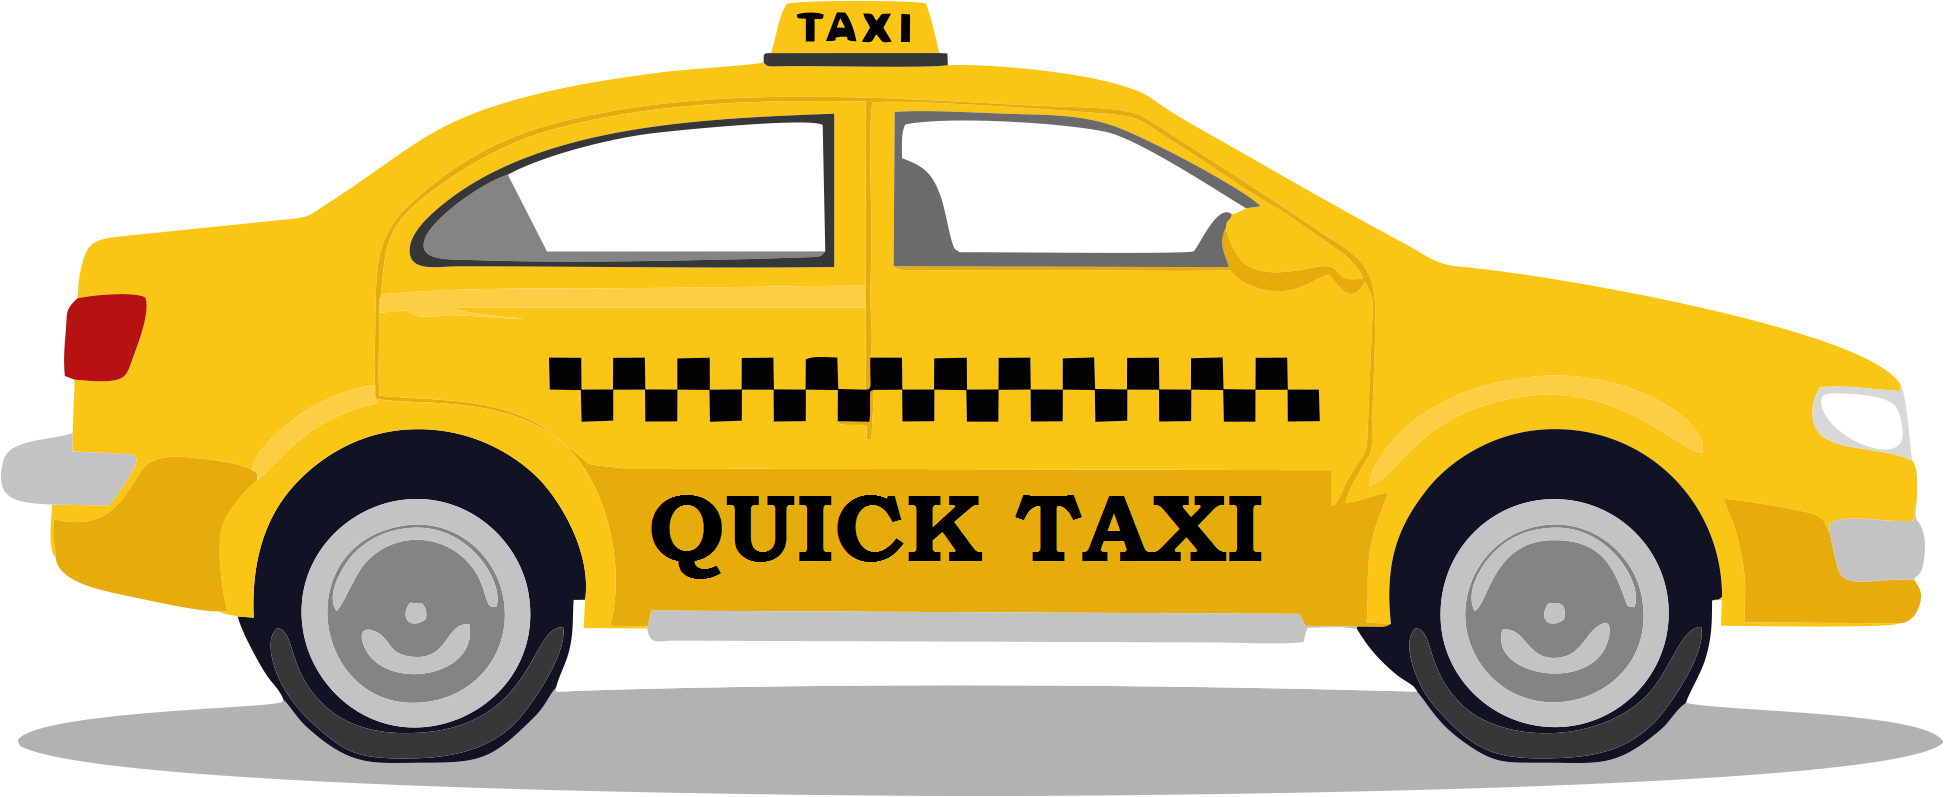 taxi service in ranchi